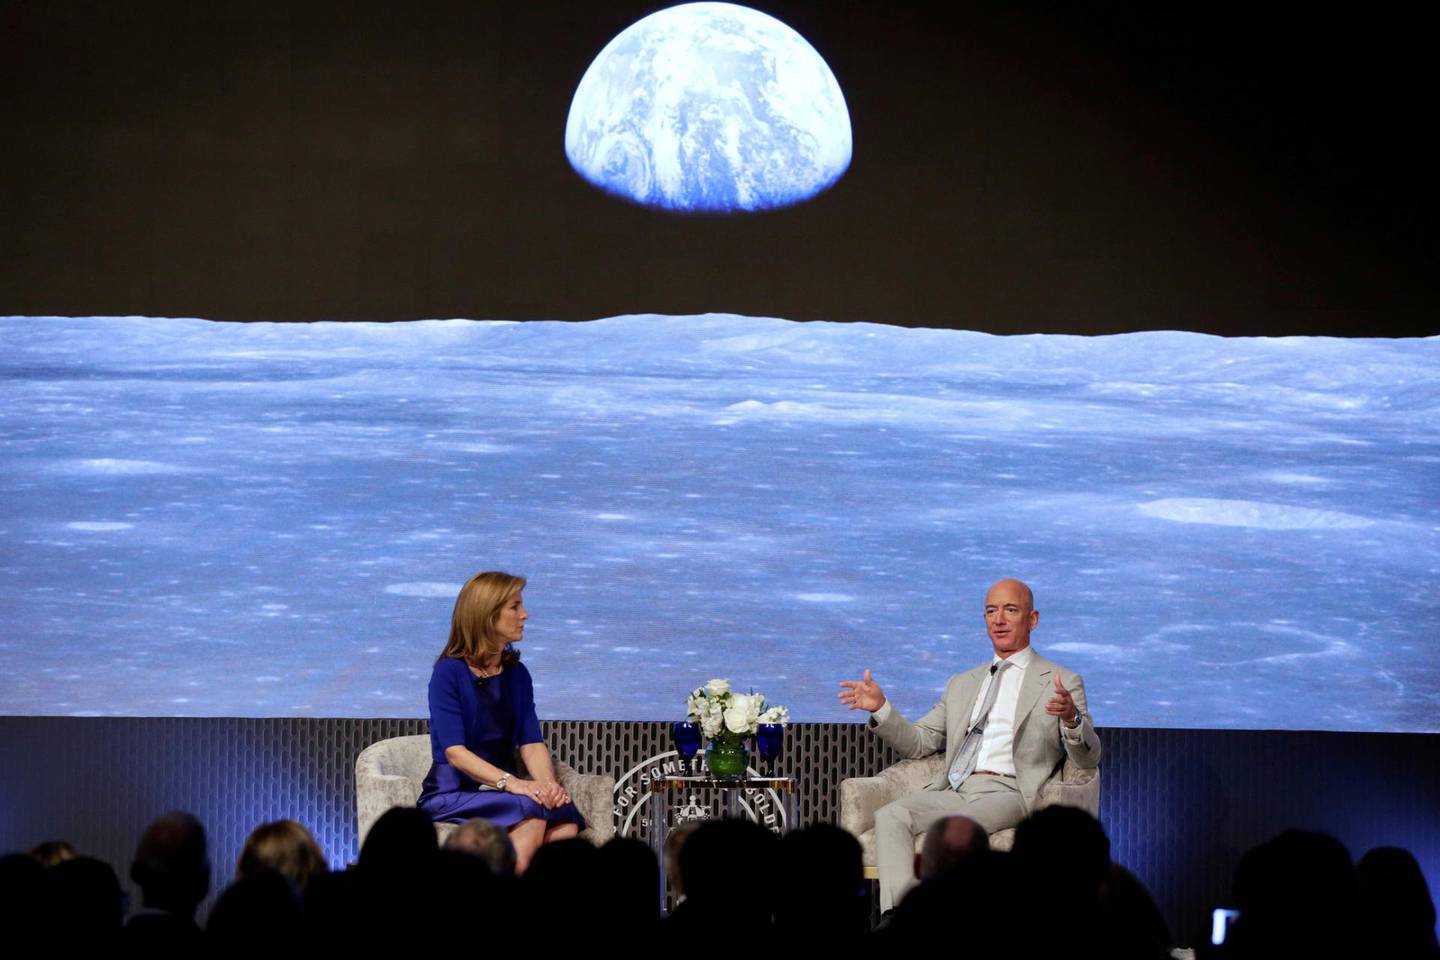 FILE PHOTO: Caroline Kennedy and Jeff Bezos, founder of Amazon and Blue Origin, have a fireside chat  during the JFK Space Summit, celebrating the 50th anniversary of the moon landing, at the John F. Kennedy Library in Boston, Massachusetts, U.S., June 19, 2019. REUTERS/Katherine Taylor/File Photo